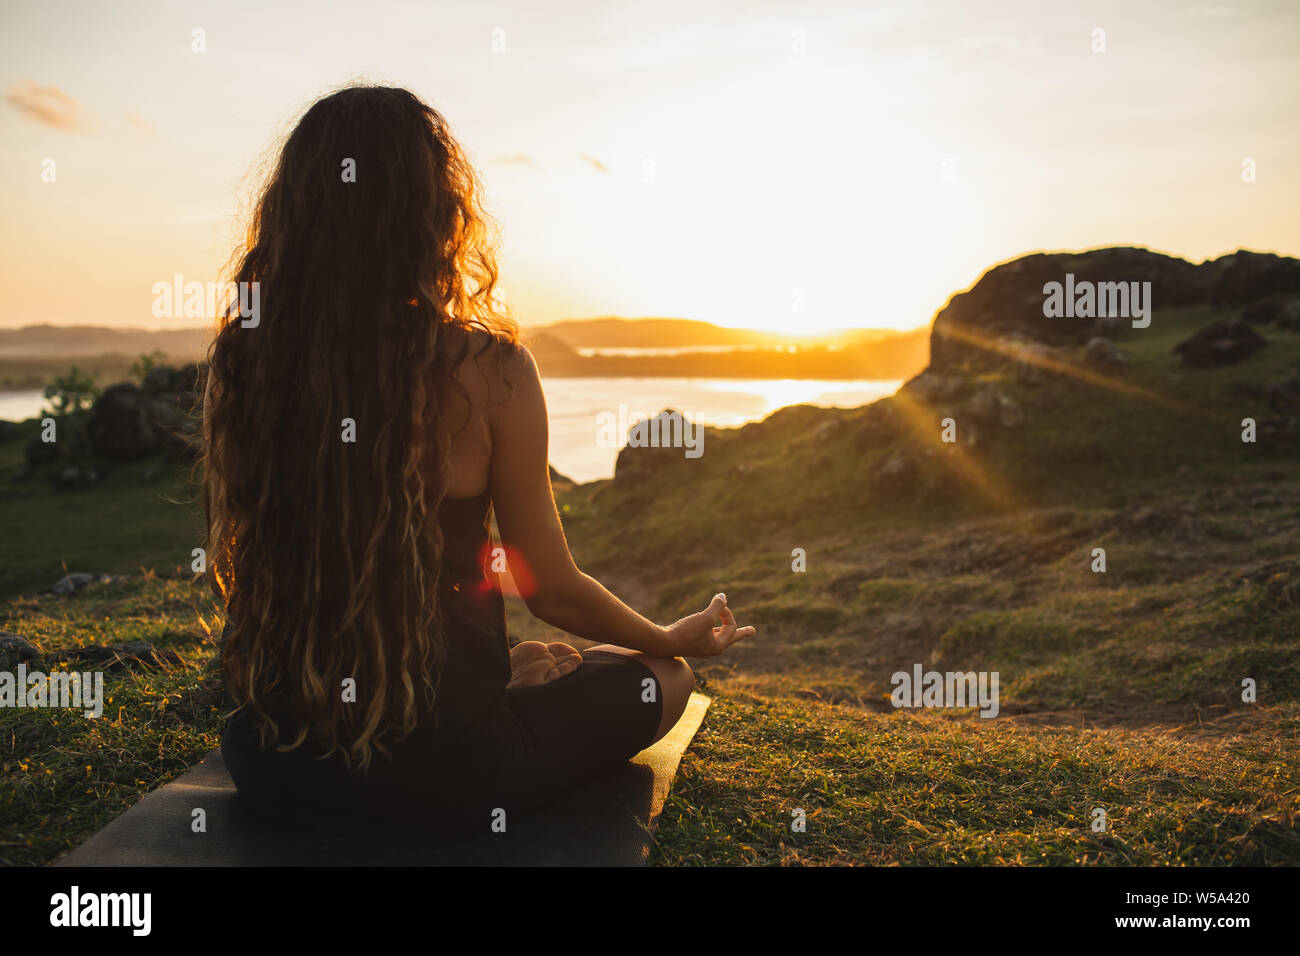 Woman meditating yoga alone at sunrise mountains. View from behind. Travel Lifestyle spiritual relaxation concept. Harmony with nature. Stock Photo